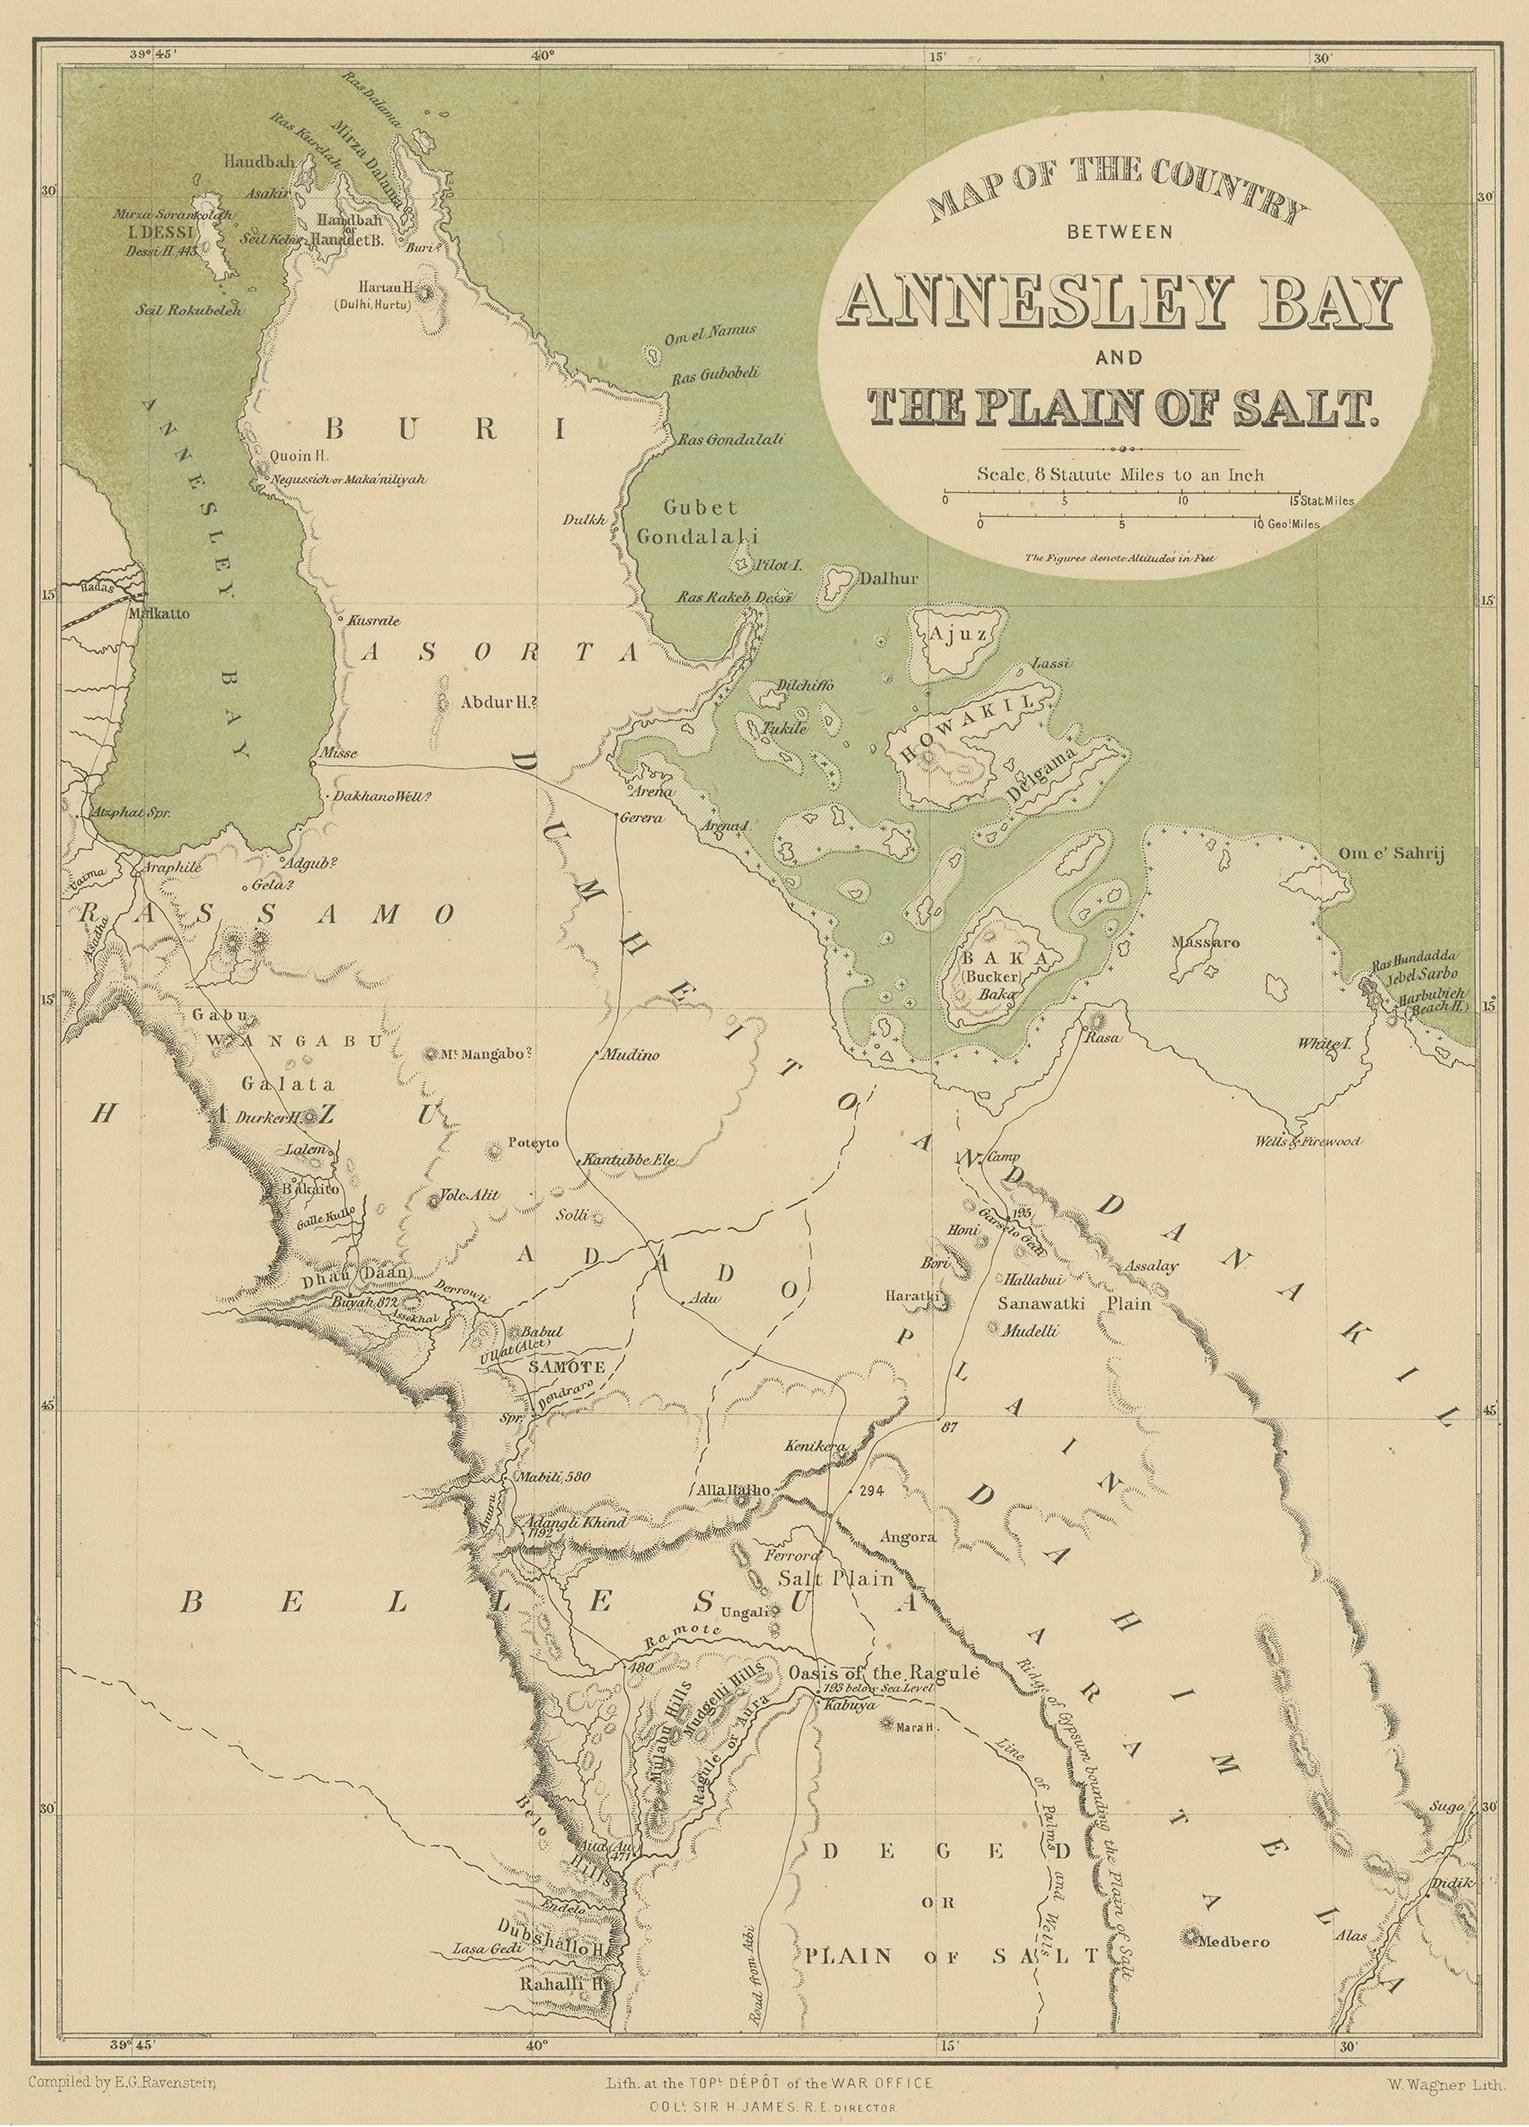 Antique map titled 'Map of the Country between Annesley Bay and the Plain of Salt'. Lithographed map of the region near the Gulf of Zula, also known as Annesley Bay, Baia di Arafali or Zula Bahir Selat’e, is a body of water on the Eritrean coastline